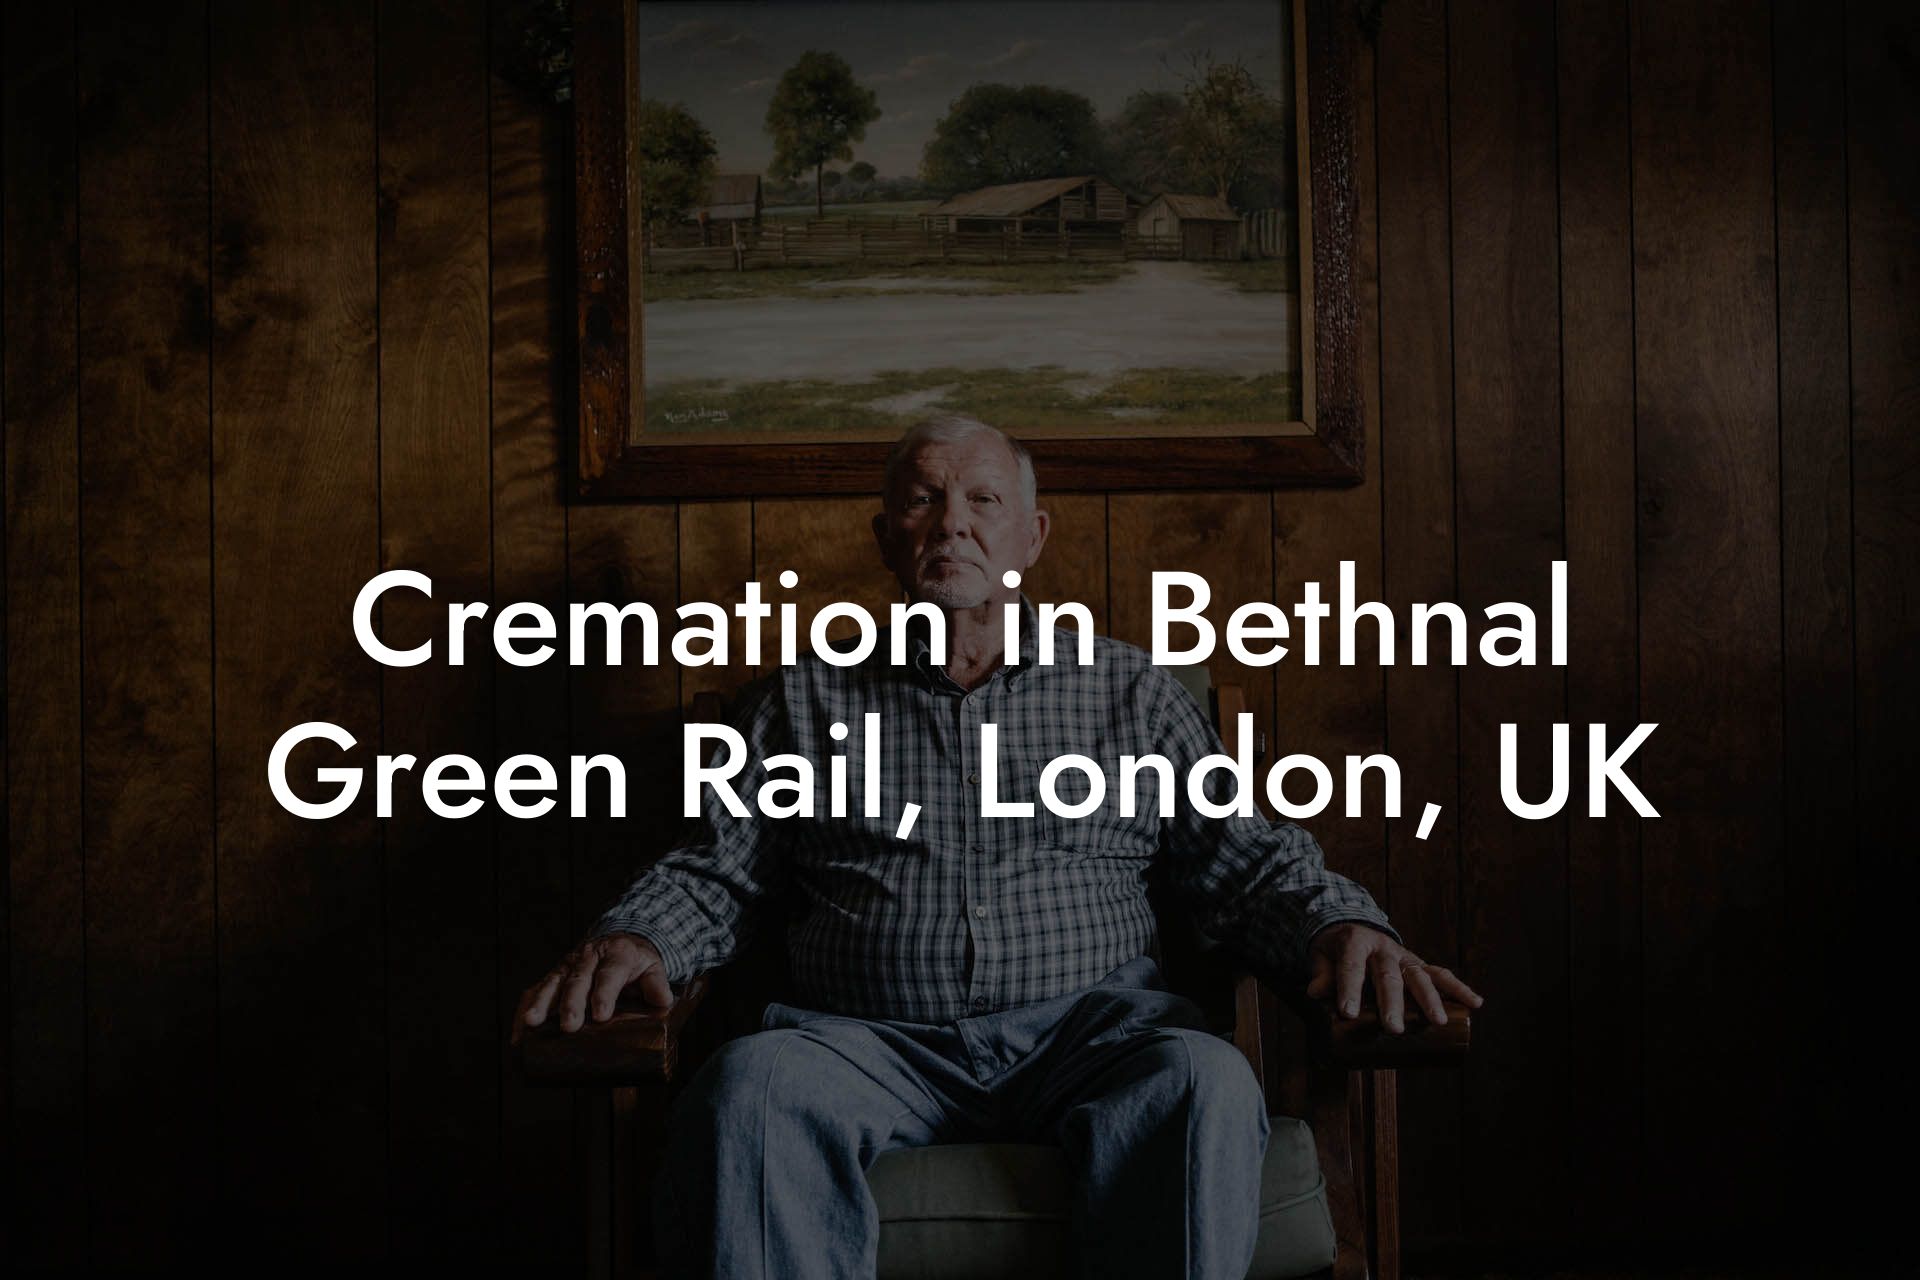 Cremation in Bethnal Green Rail, London, UK